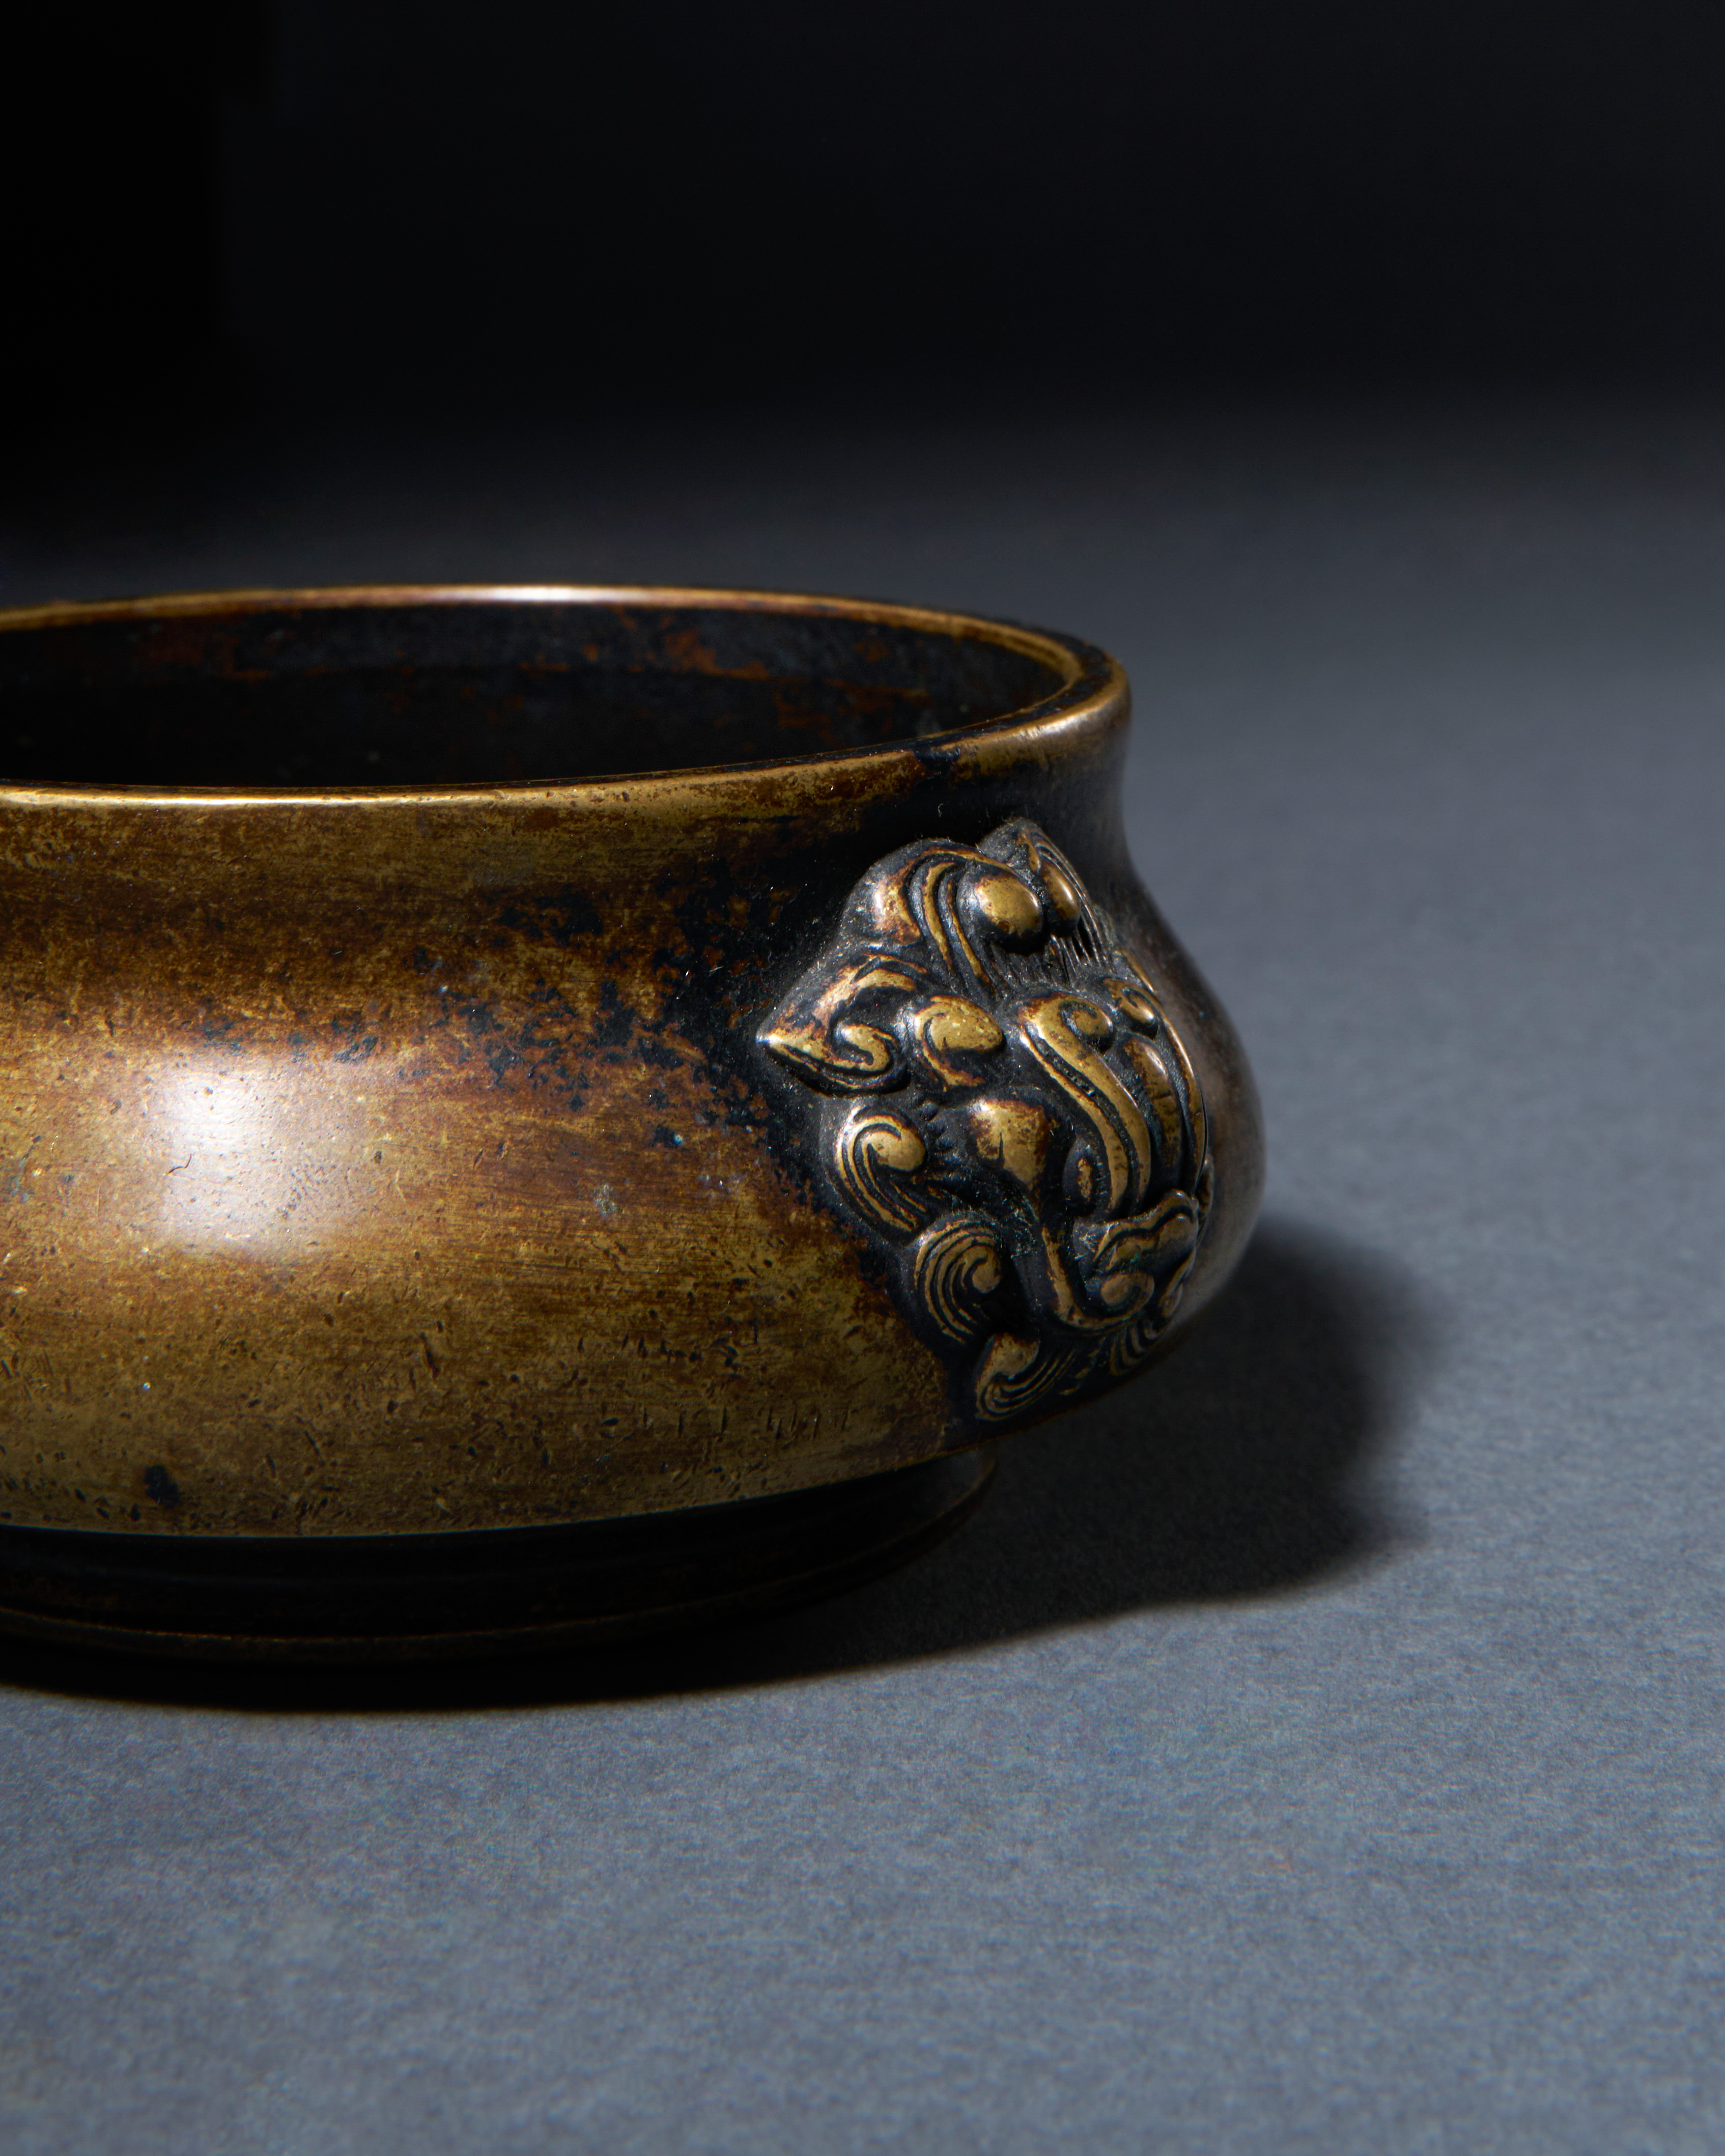 A CHINESE BRONZE TRIPOD CENSER, QING DYNASTY (1644-1911) - Image 3 of 5